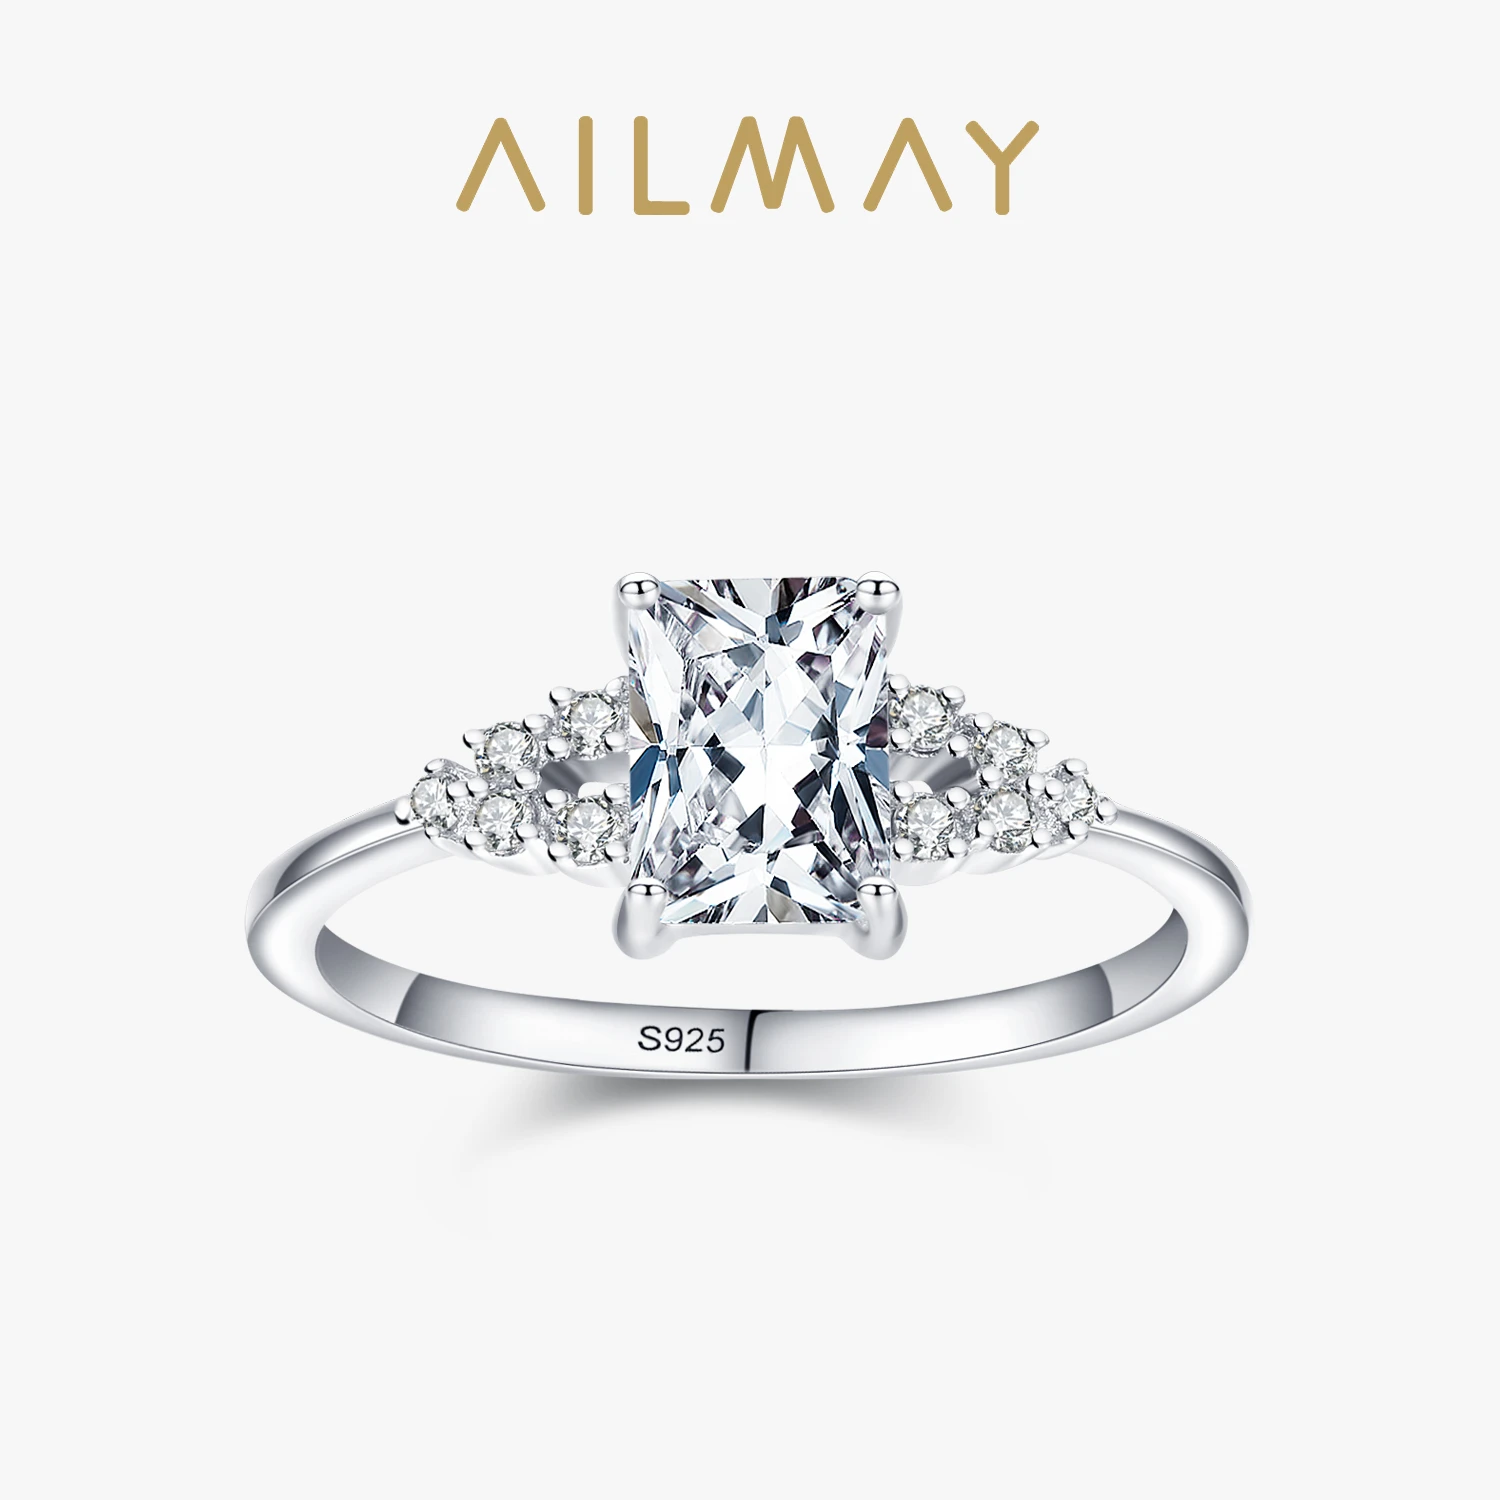 Ailmay Genuine 925 Sterling Silver Wedding Ring Fashionc Luxury Cubic Zirconia Rings For Women Wedding Statement Fine Jewelry